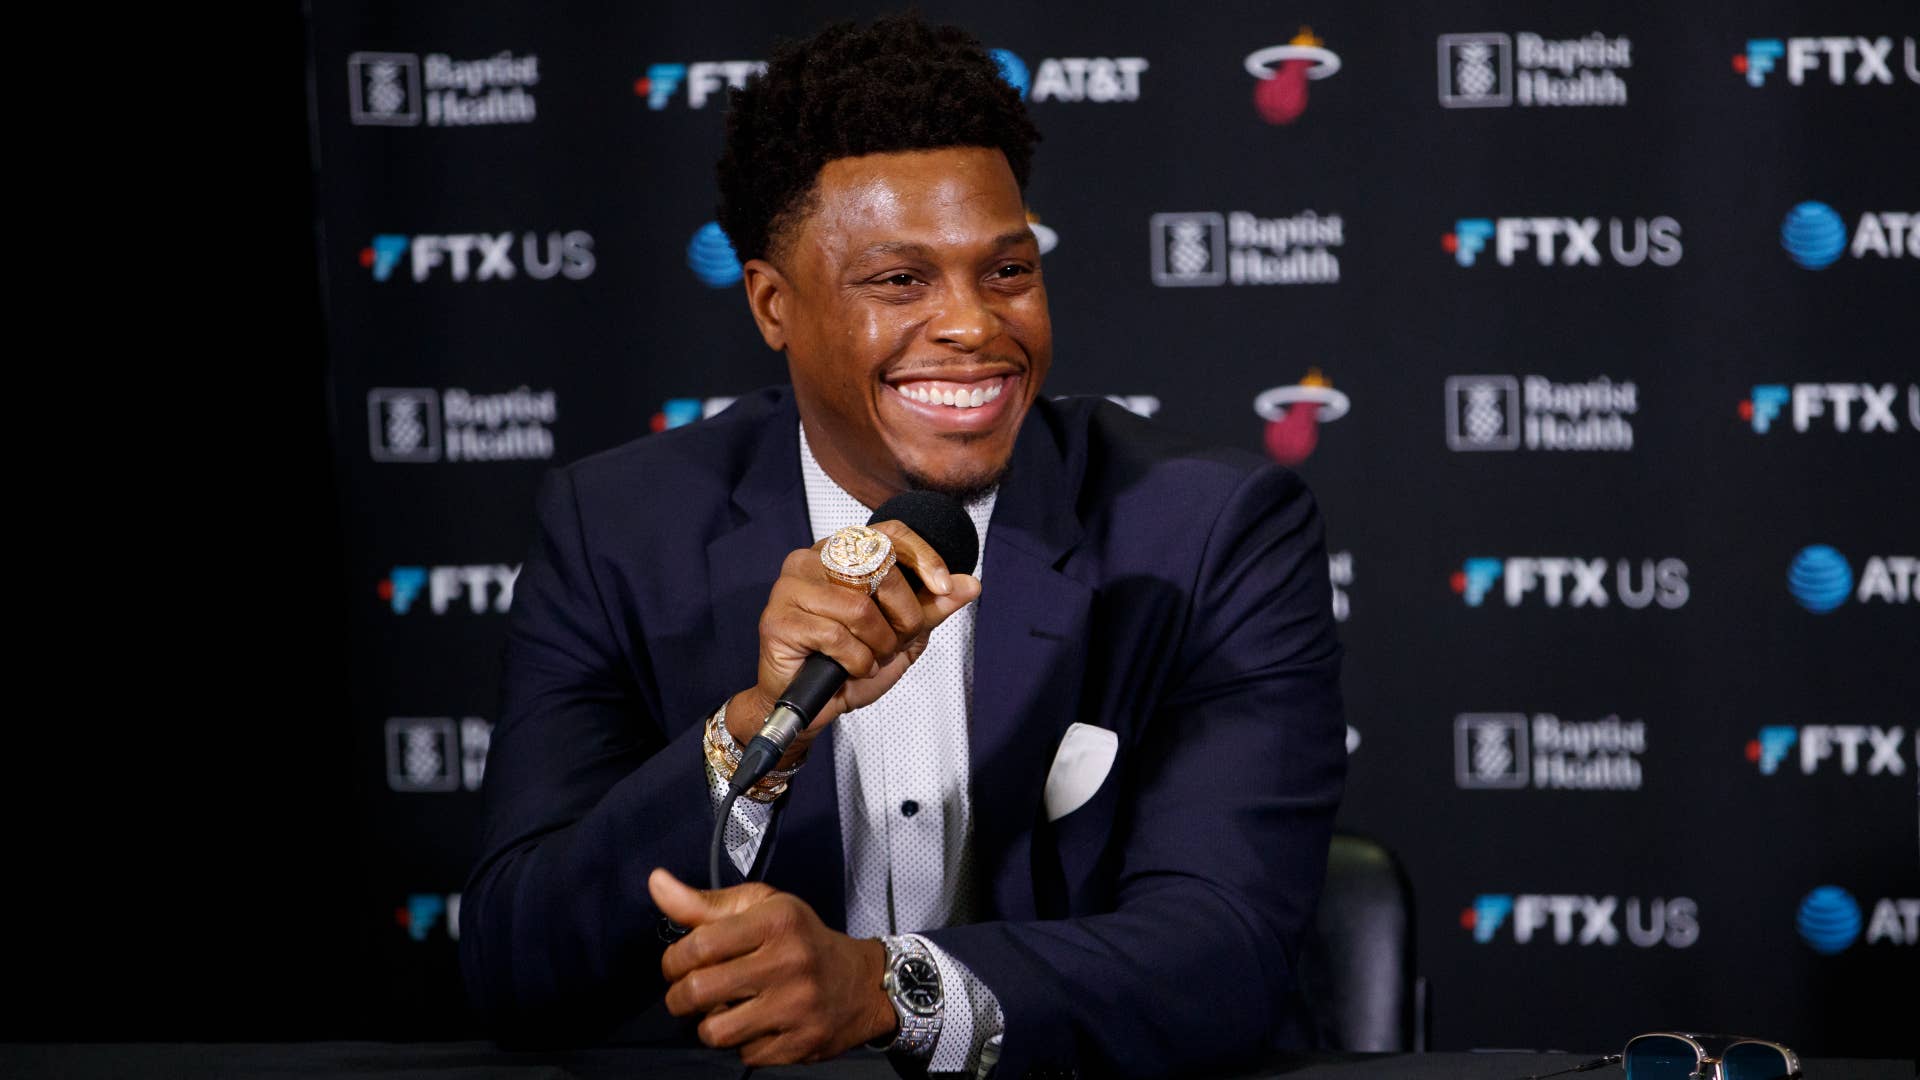 Kyle Lowry talking to press during his return to Toronto with the Miami Heat.